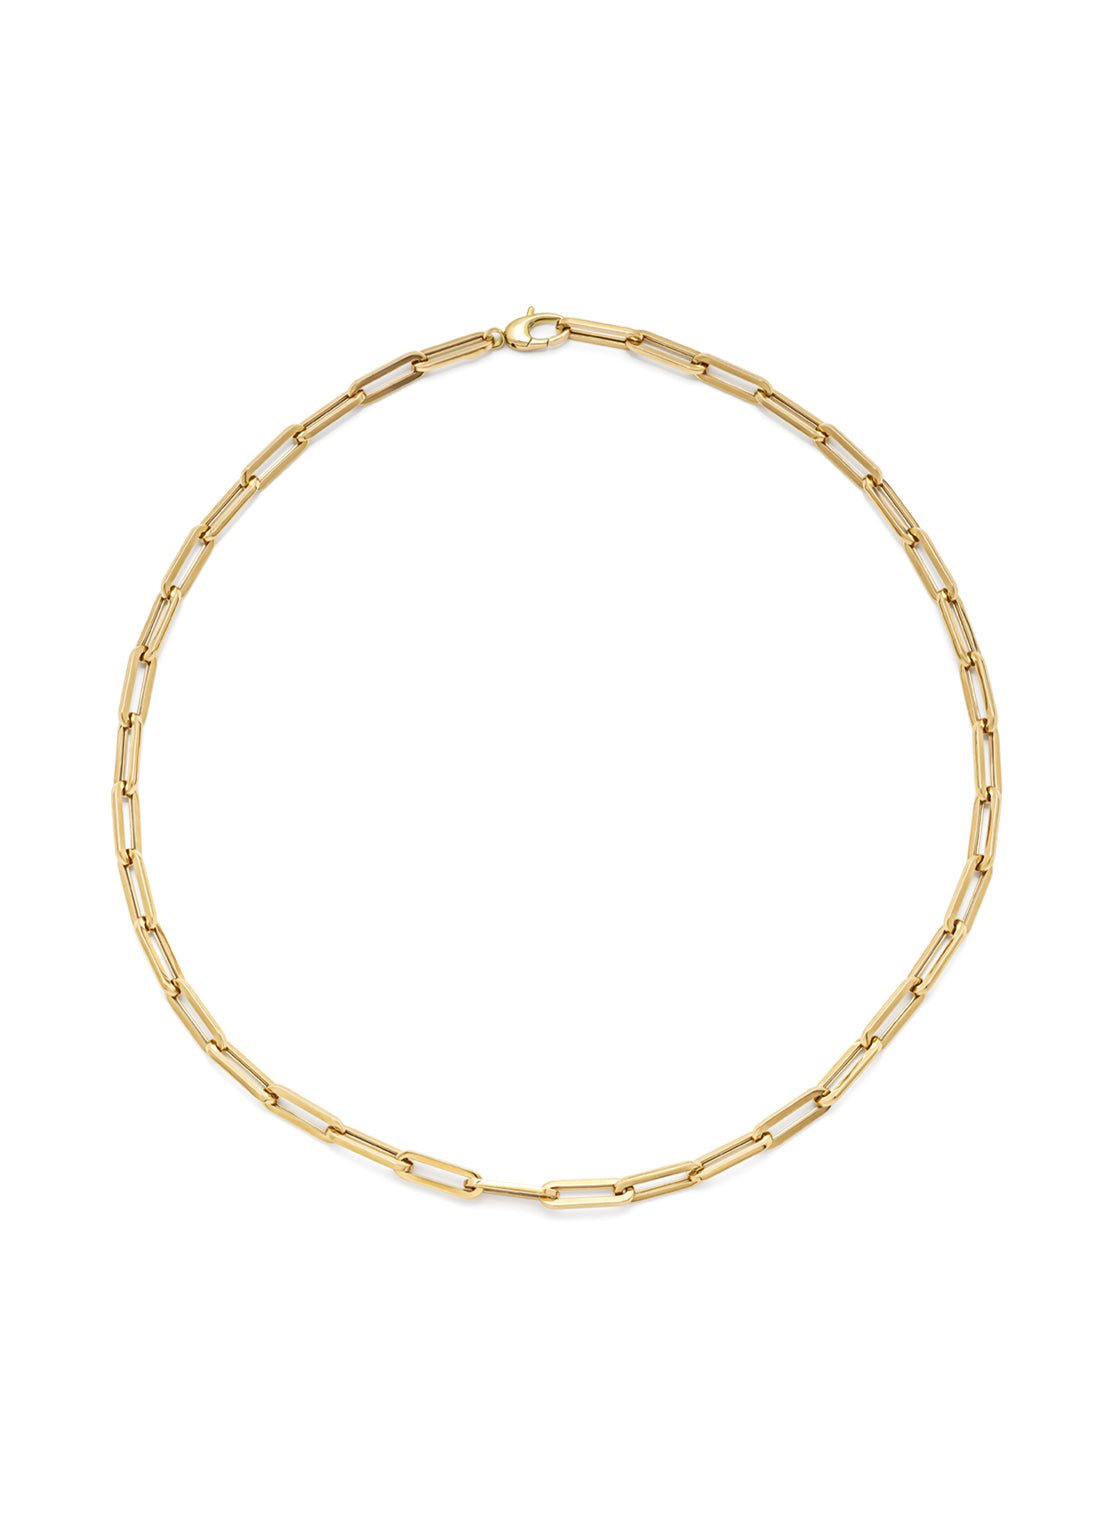 Geelgouden collier Closed Forever 50 cm